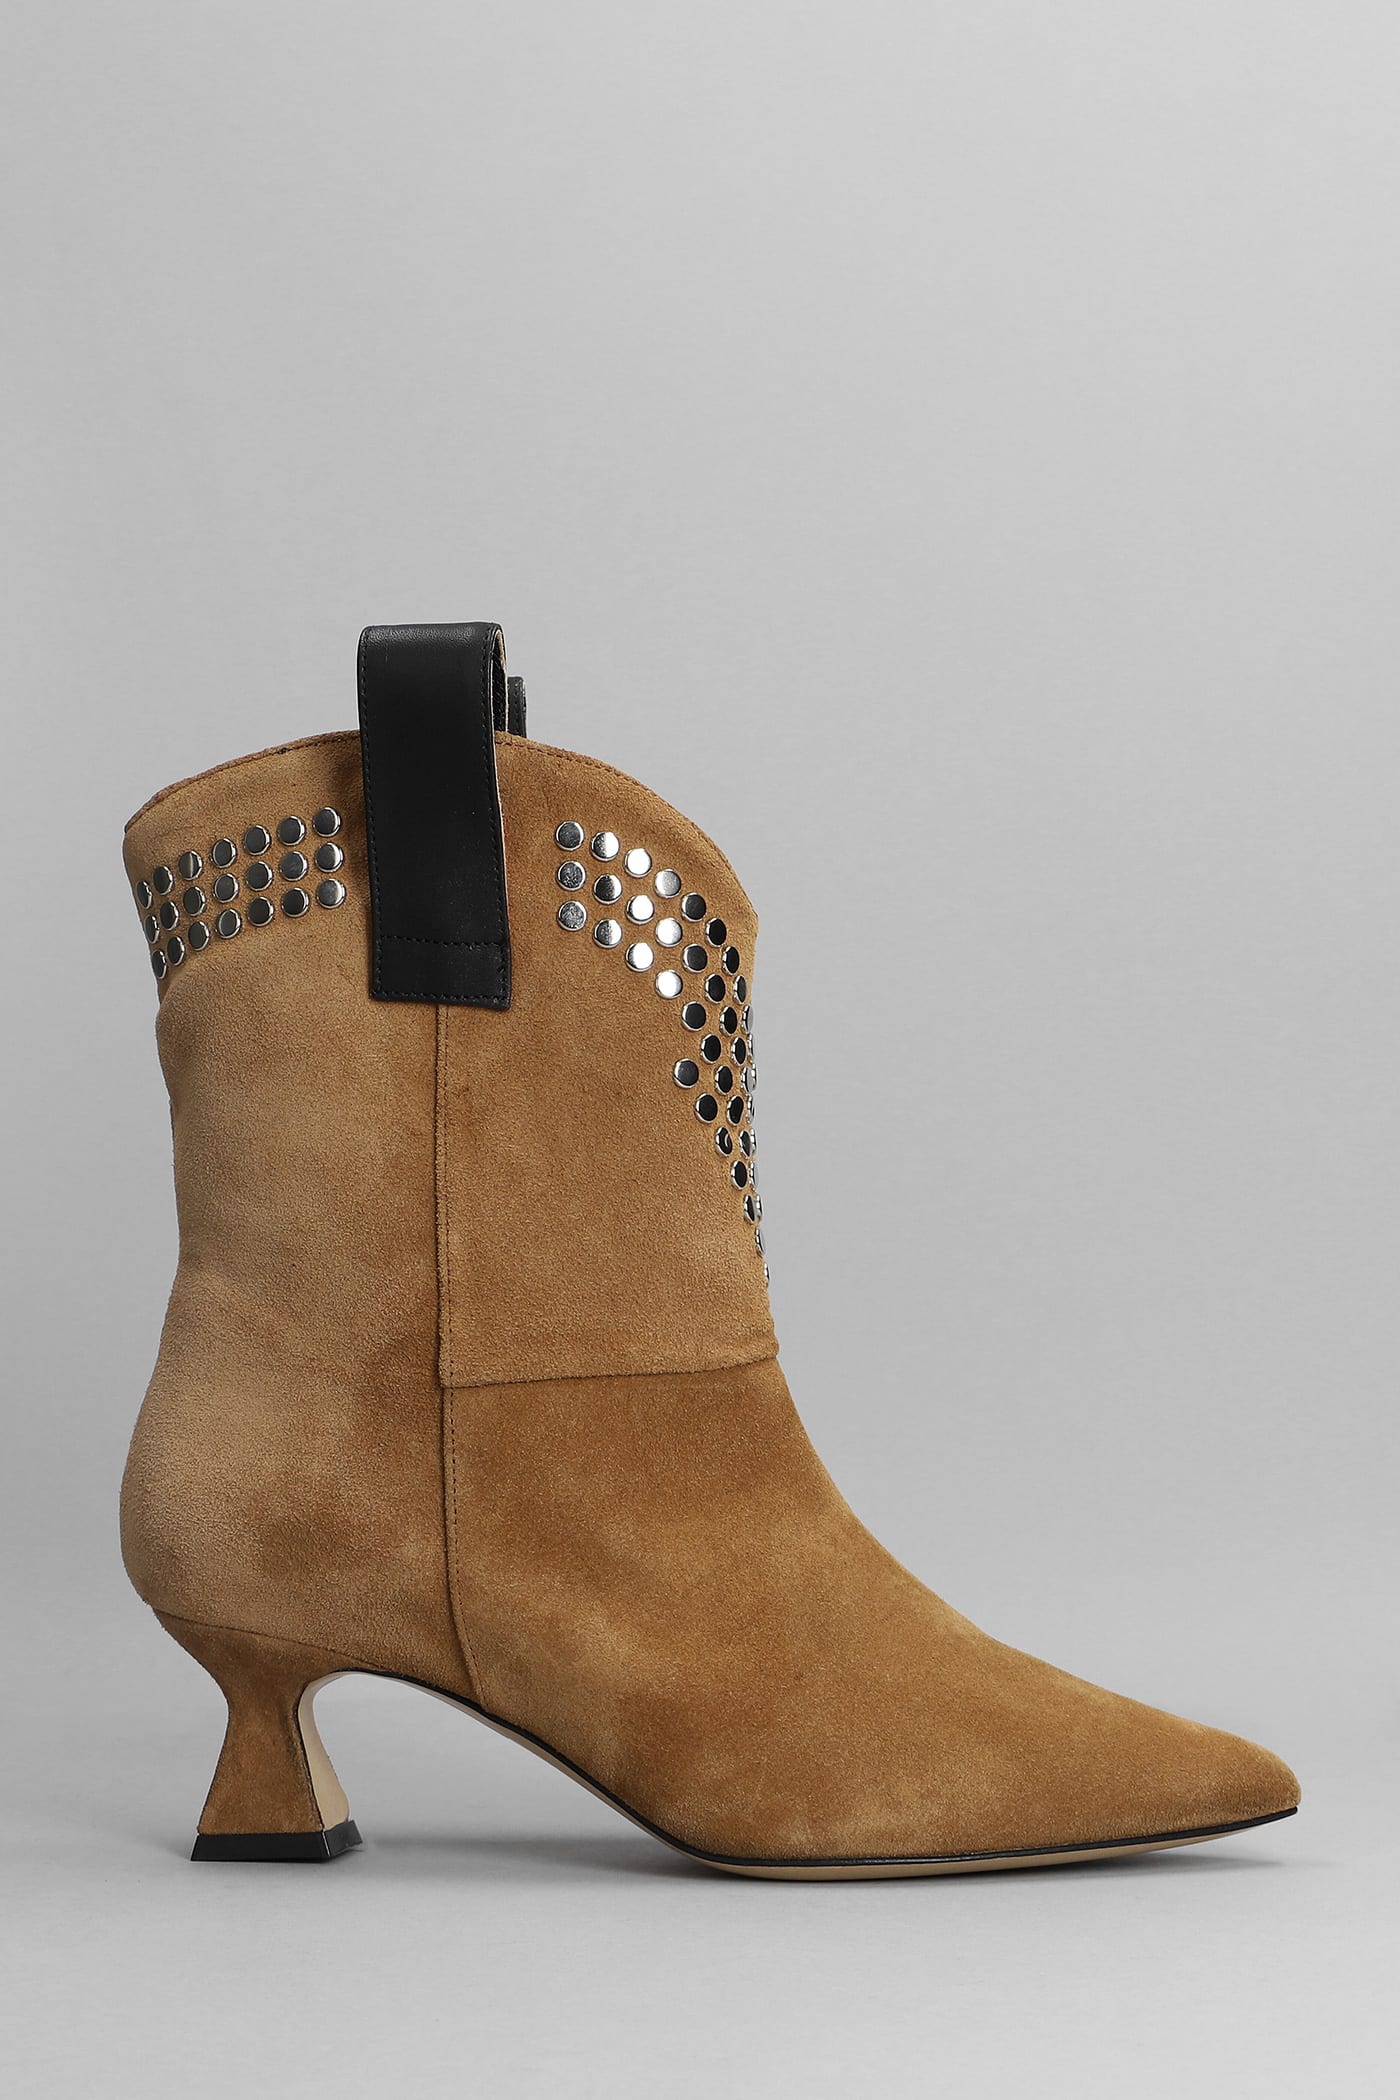 Alchimia High Heels Ankle Boots In Brown Suede